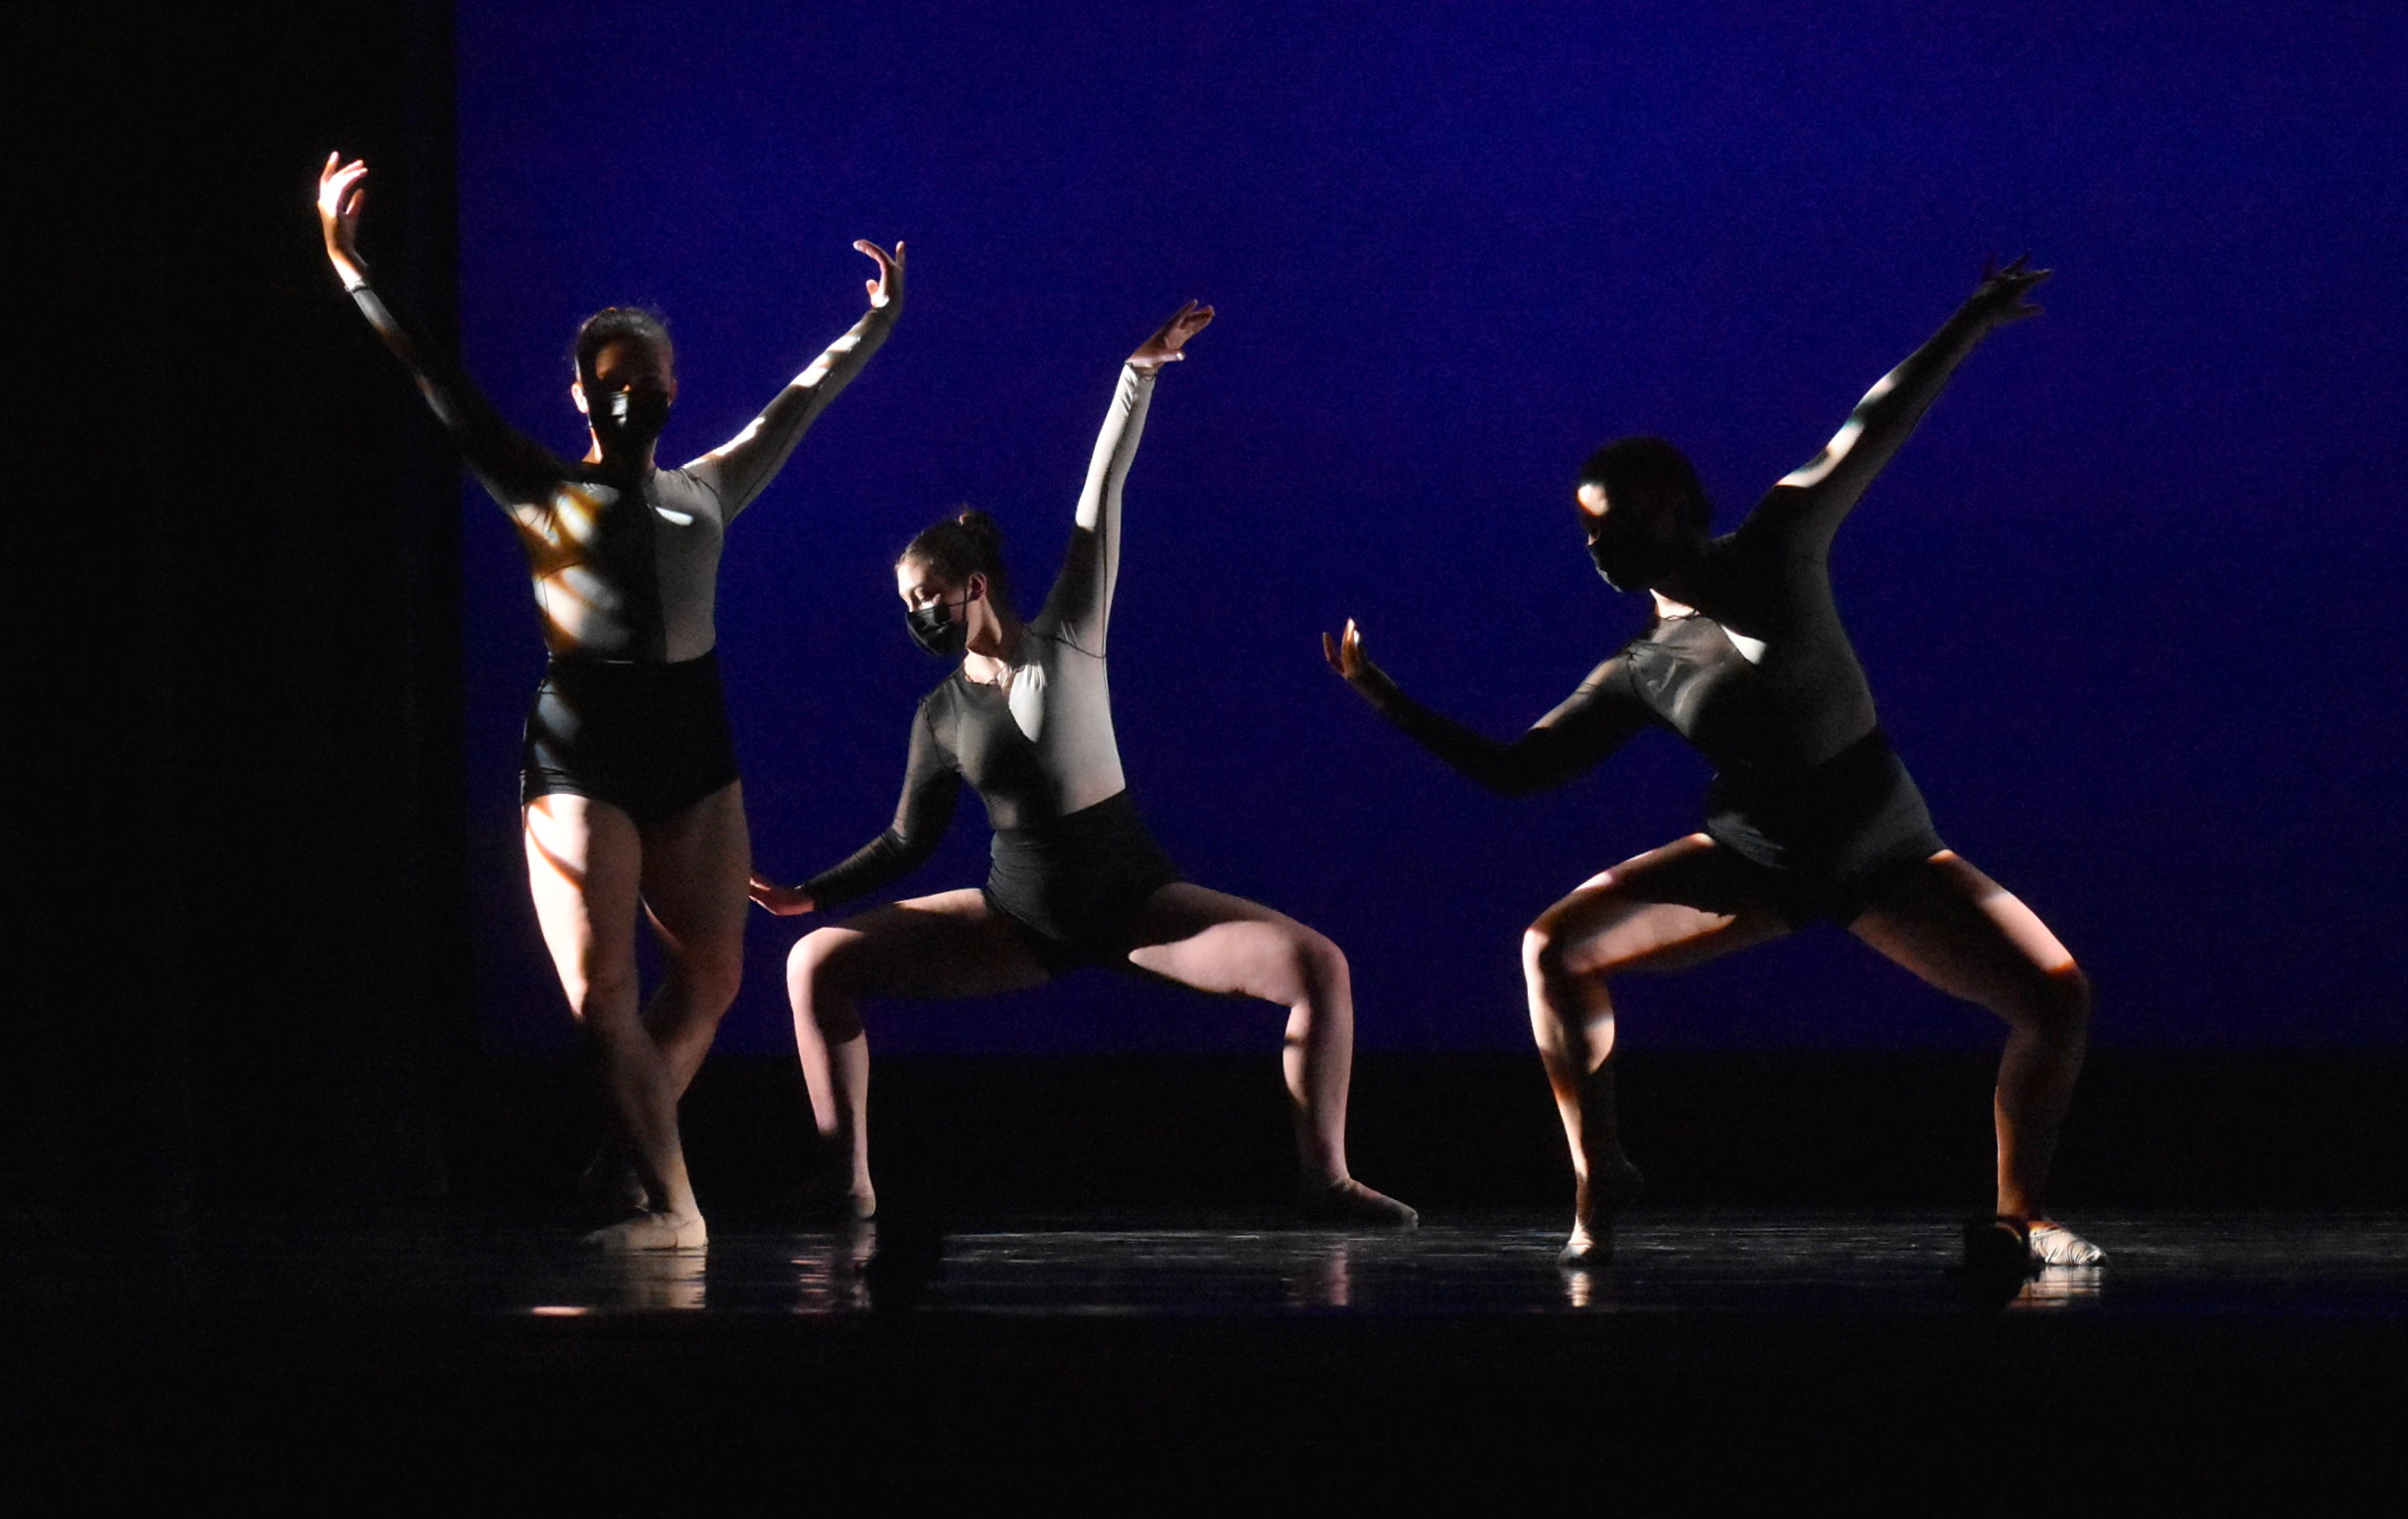 Shifting Focus: the Spring Dance Concert